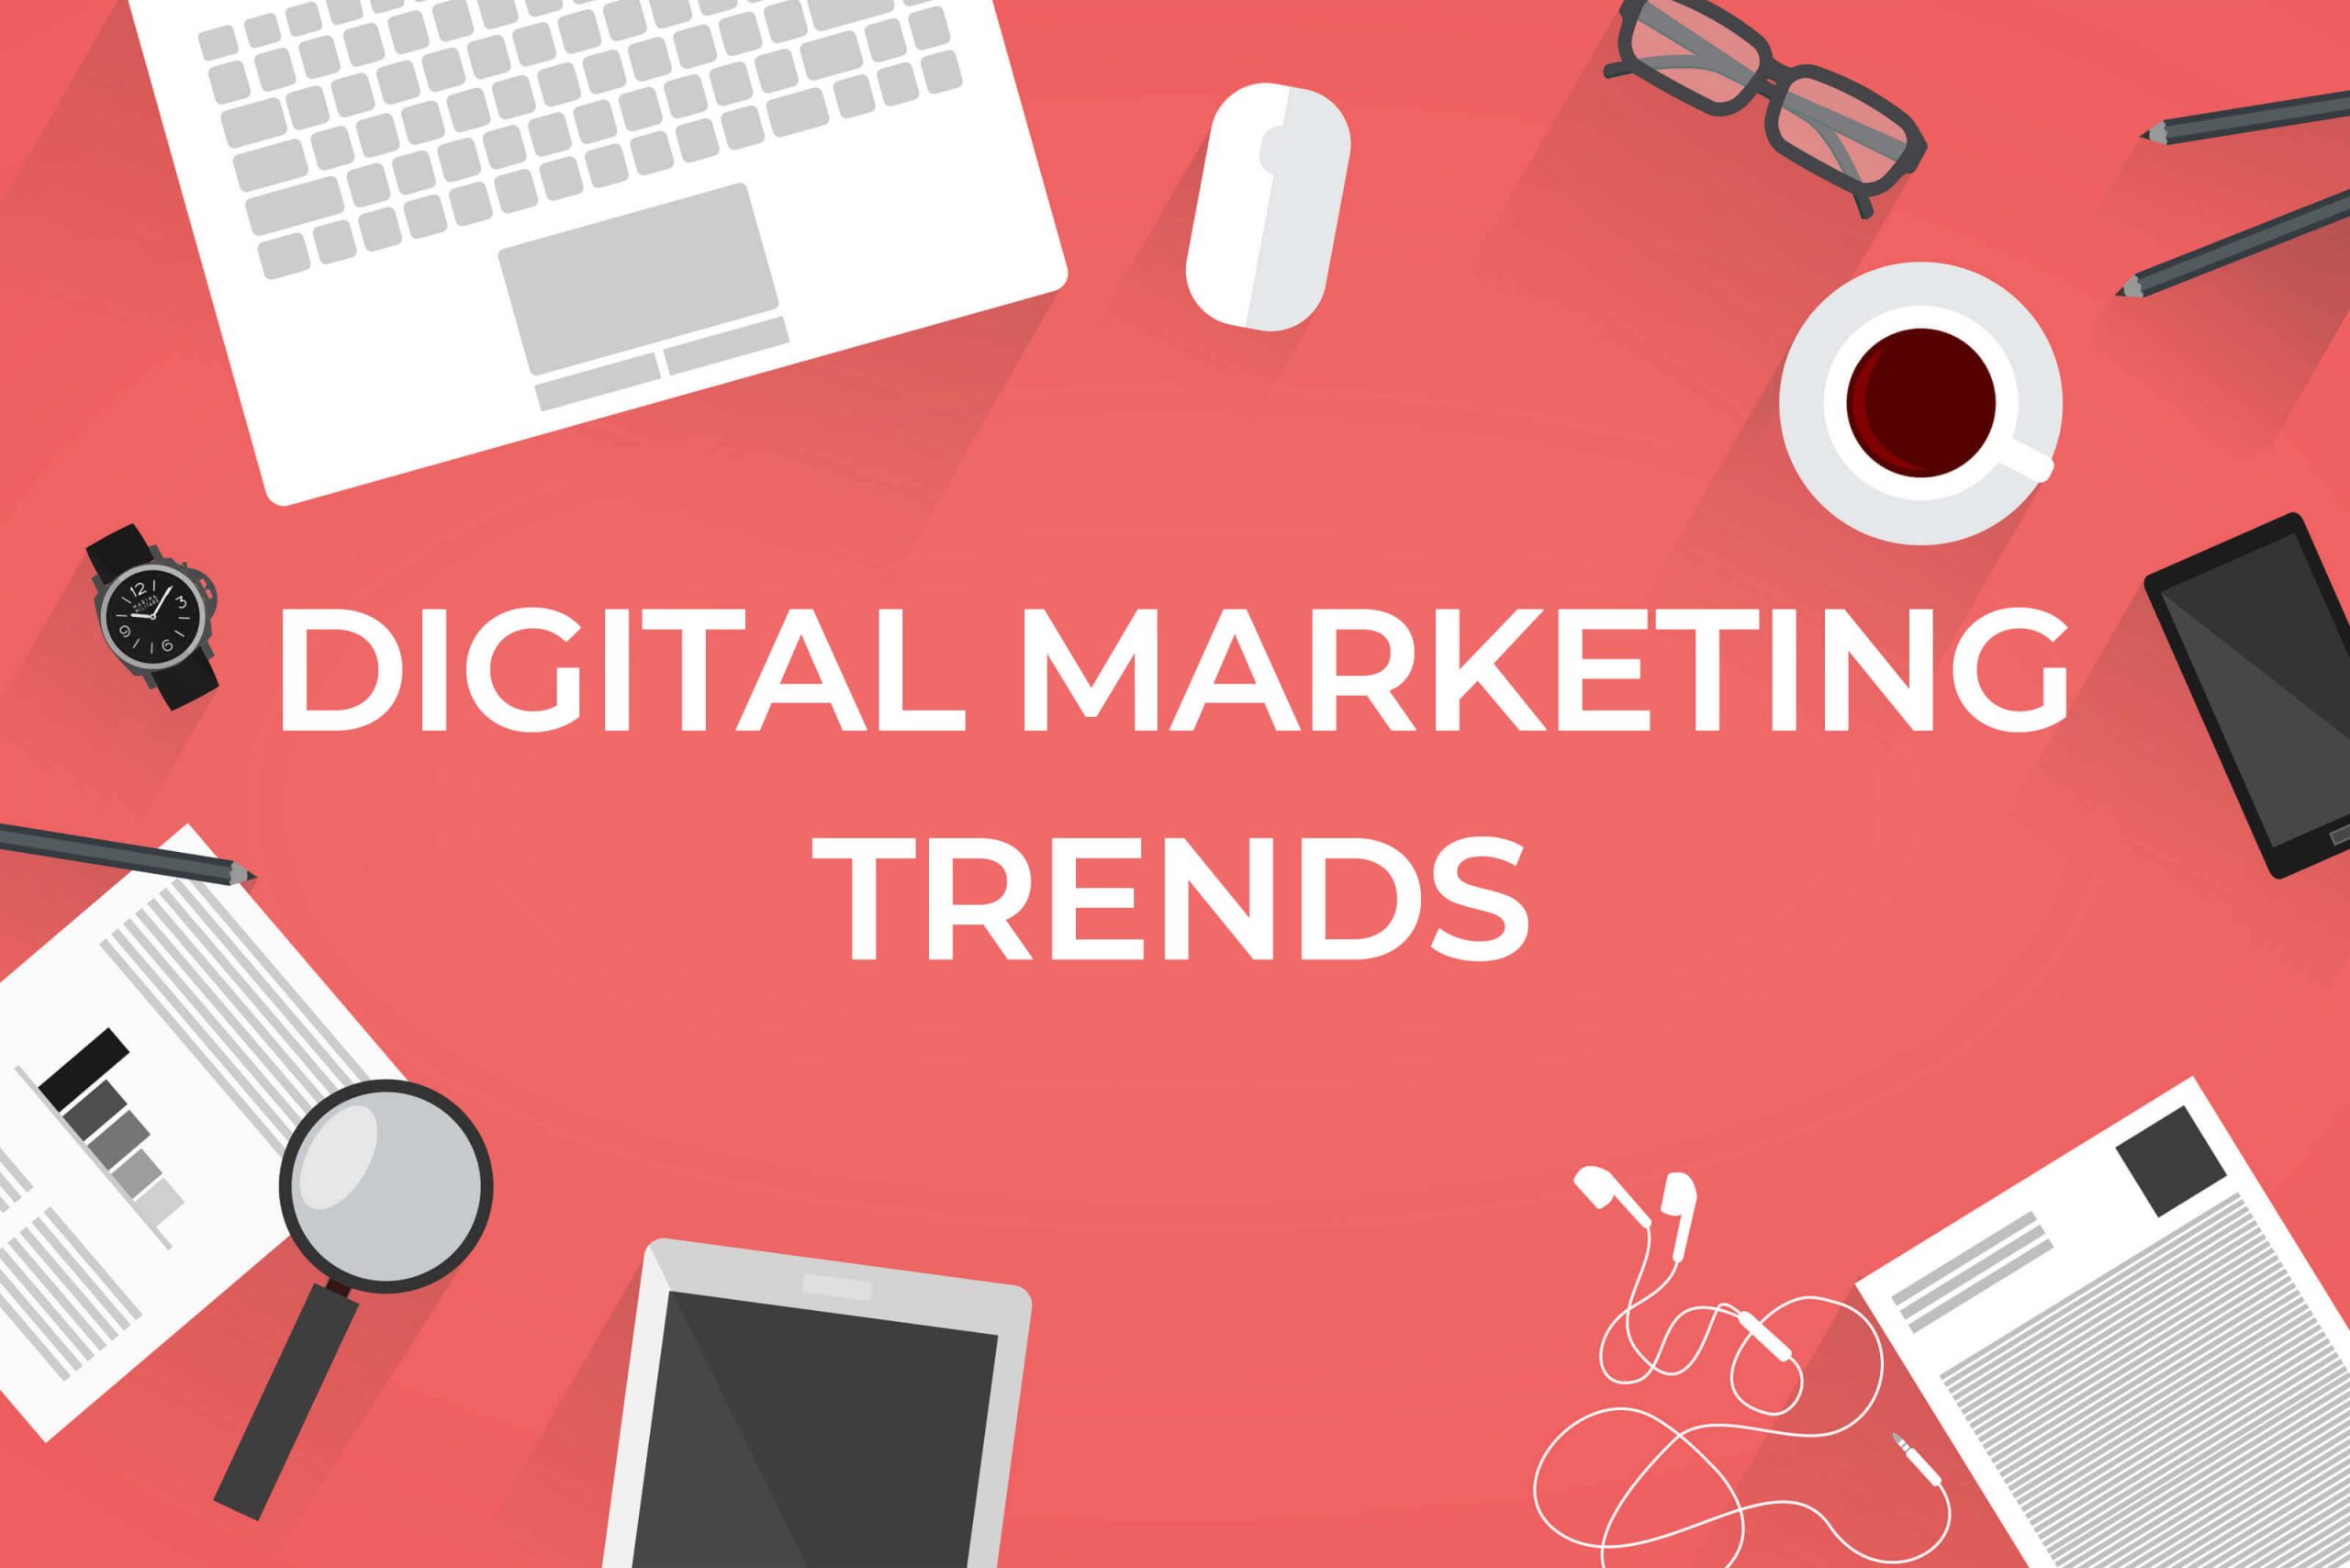 Digital Marketing SEO Trends: What’s New in the Online World